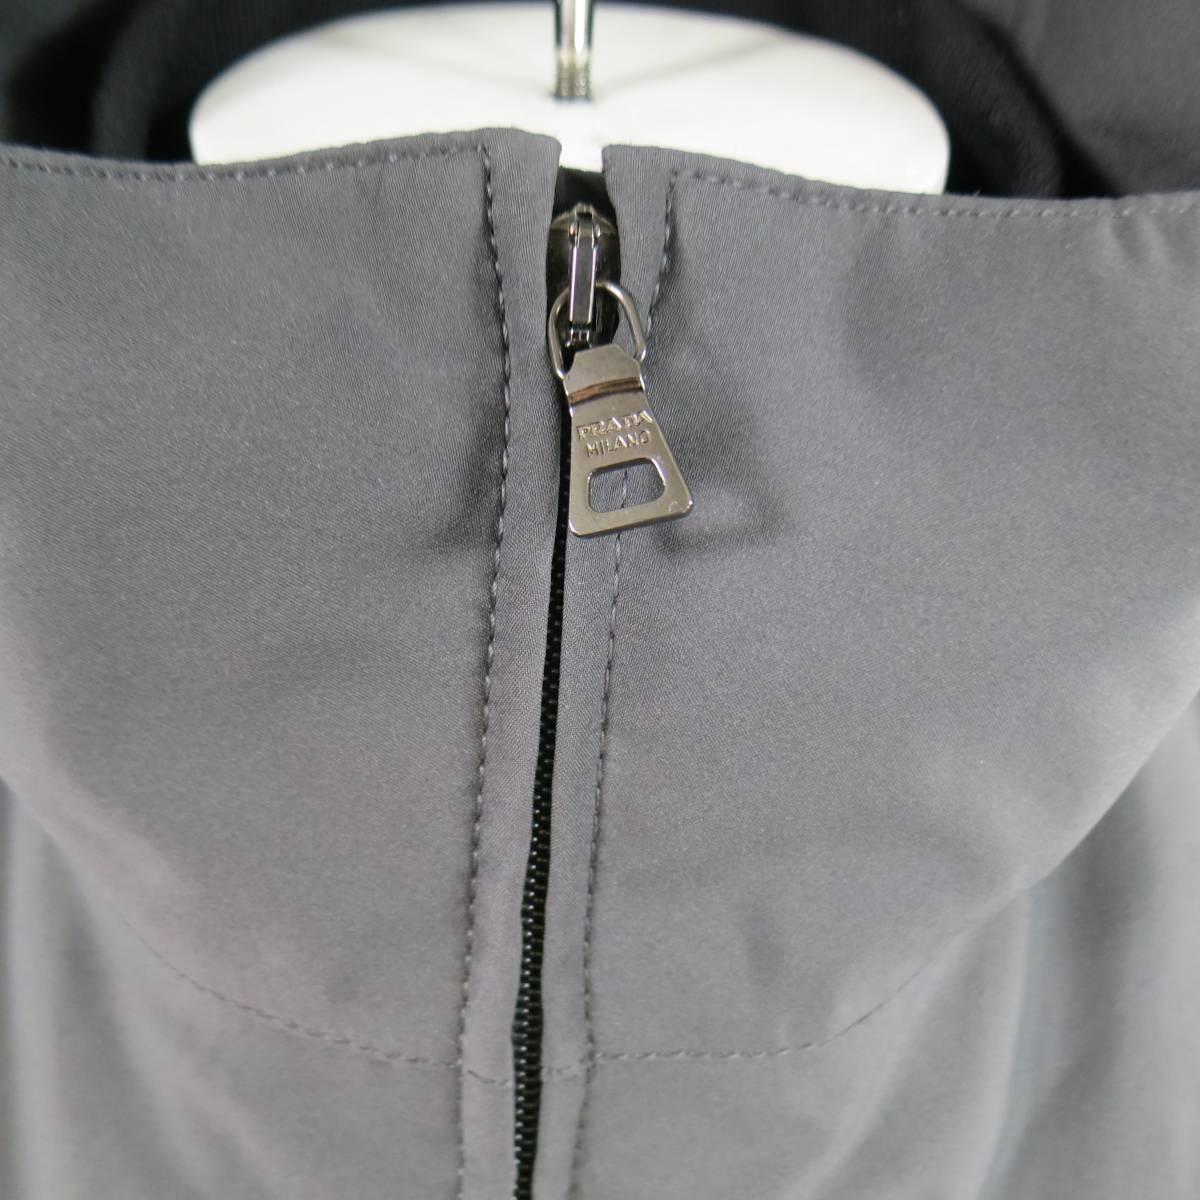 PRADA Jacket consists of nylon material in a slate color tone. Designed with a detachable double layer, zipper front closure, inseam side zipper pockets and tone-on-tone stitching along seams and velcro cuffs. Second layer comes in a polyester